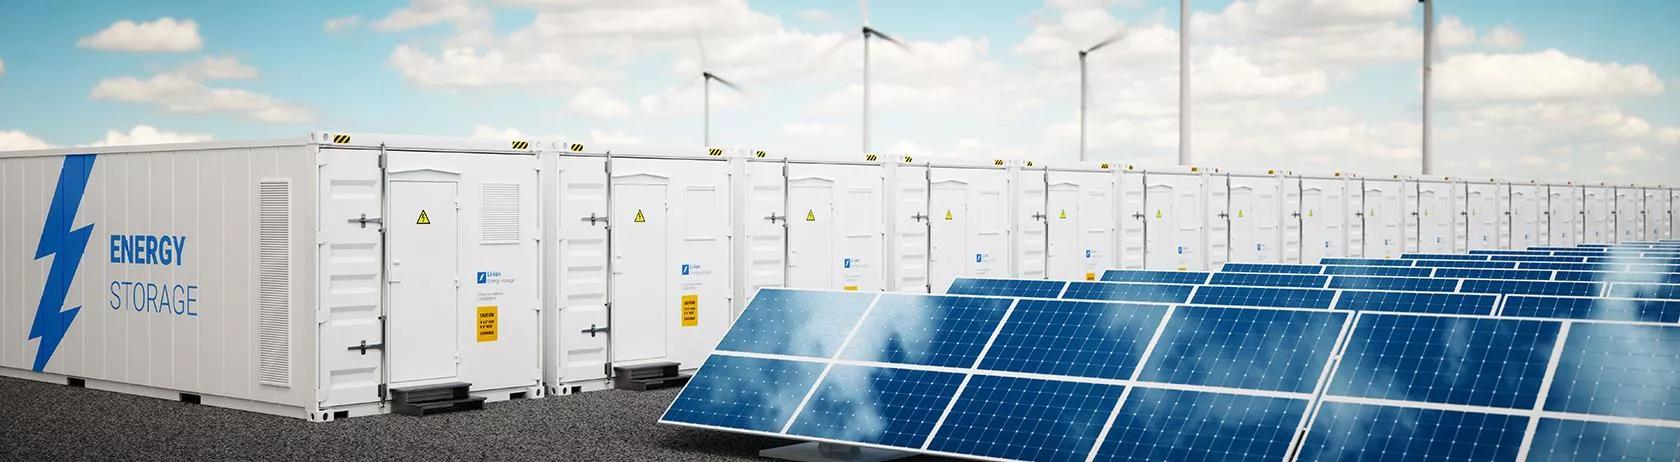 Solar panels and energy storage containes